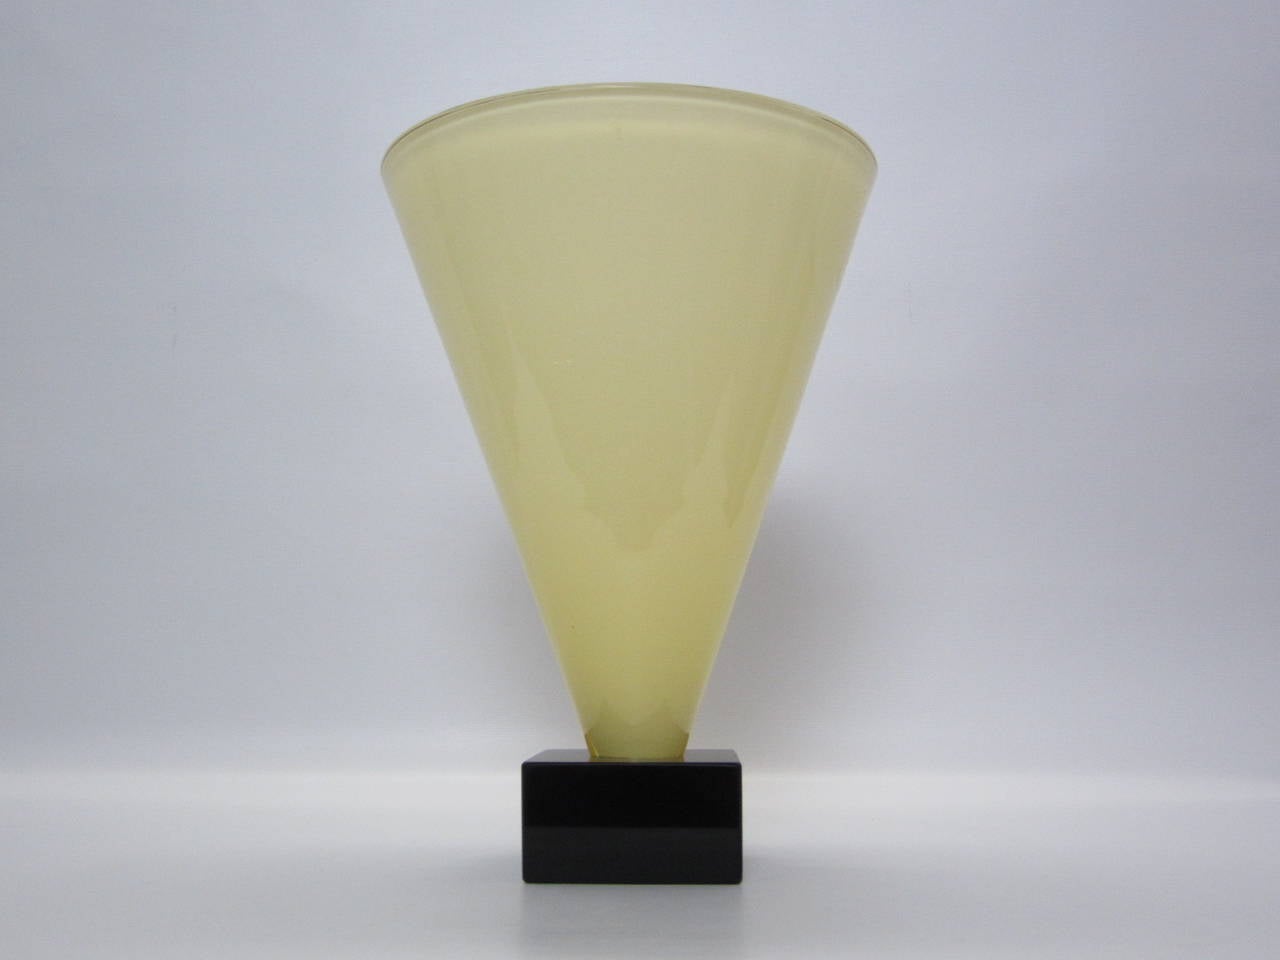 Fantastic handblown Murano glass cone shaped vase with attached black glass square block base showing etched signature A.V. Mazzega-Murano.